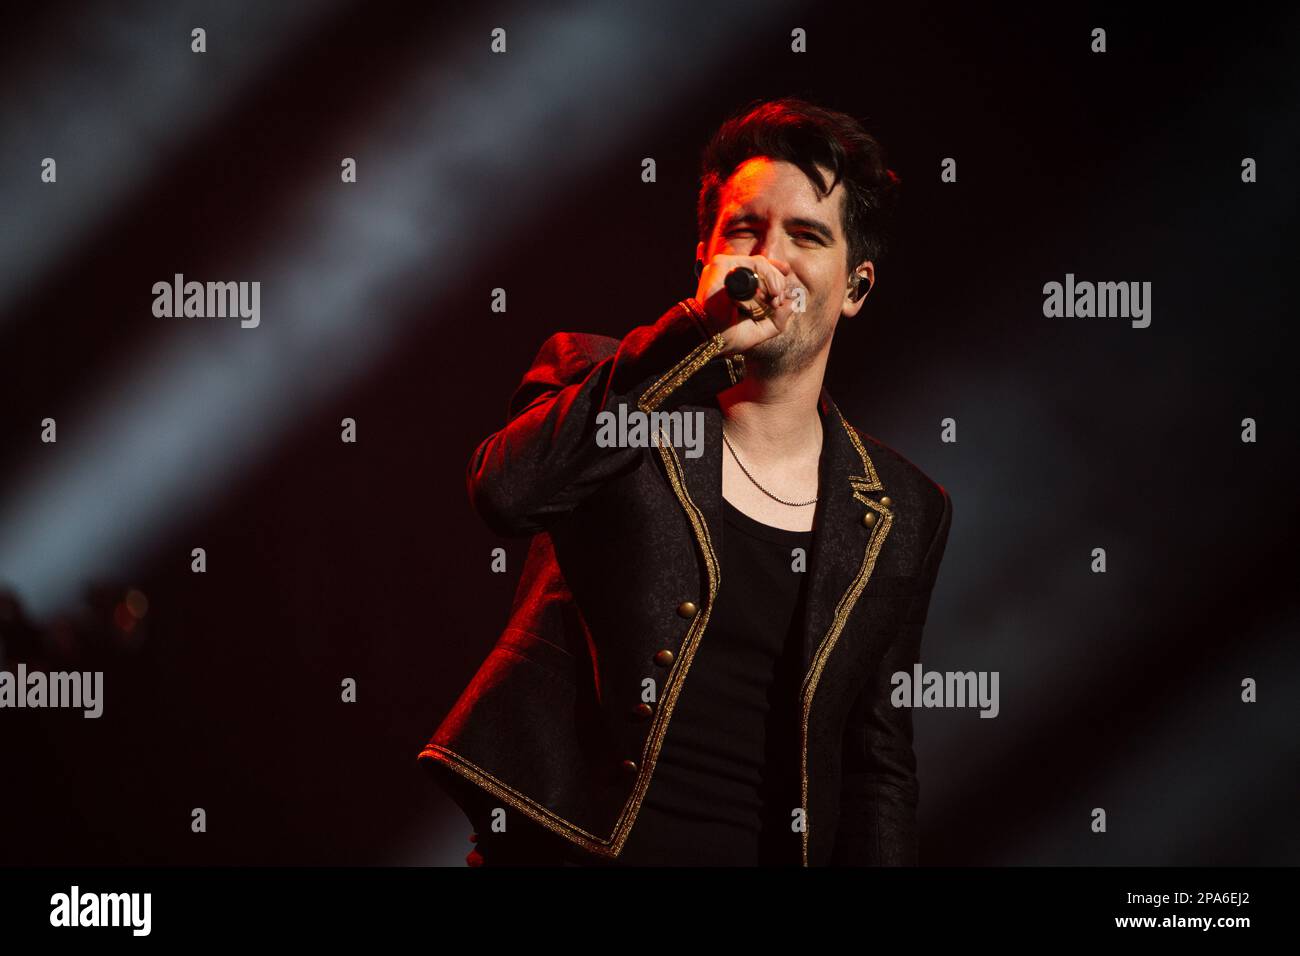 Brendon urie, Panic beim Disco-Finale der Ever Show, live in der AO Arena Manchester UK am 10